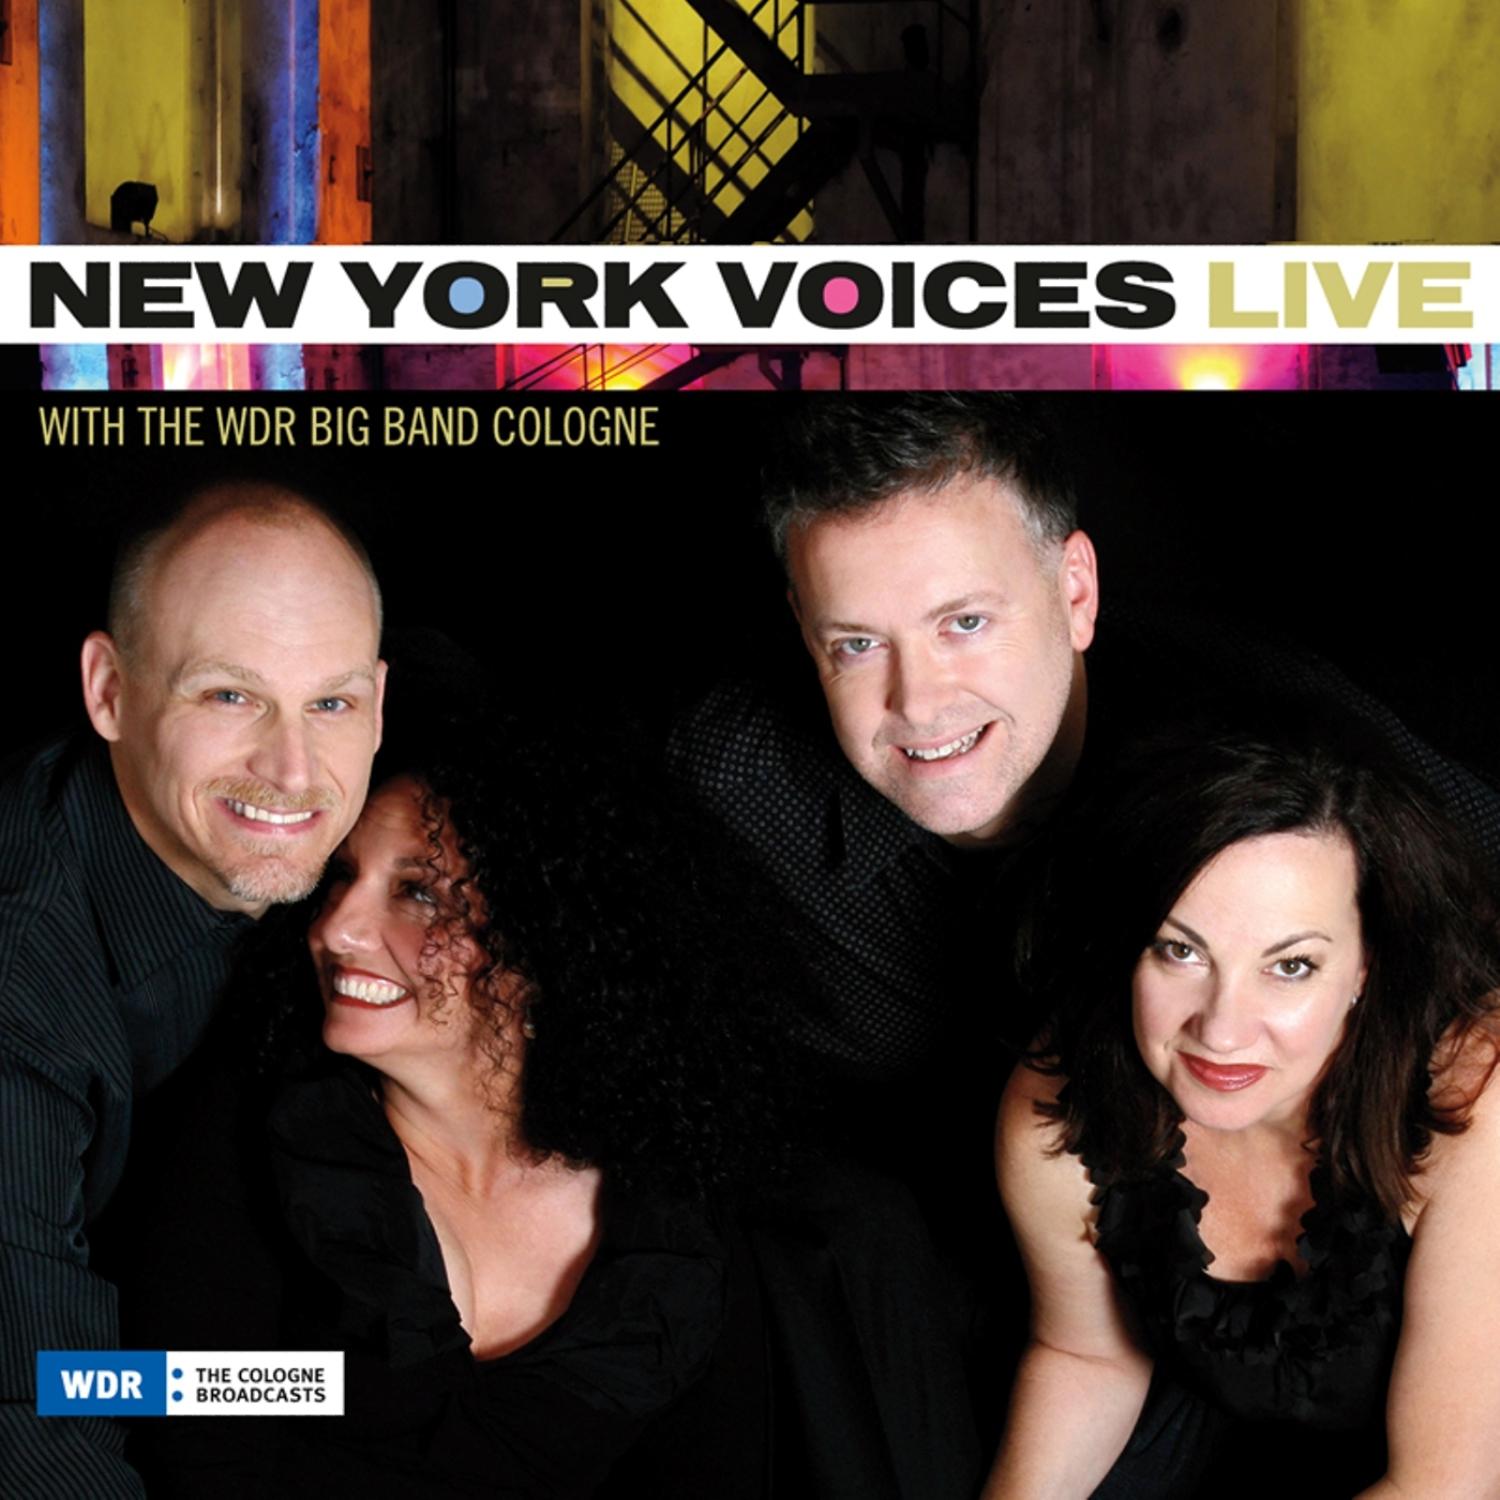 New York Voices - The Sultan Fainted